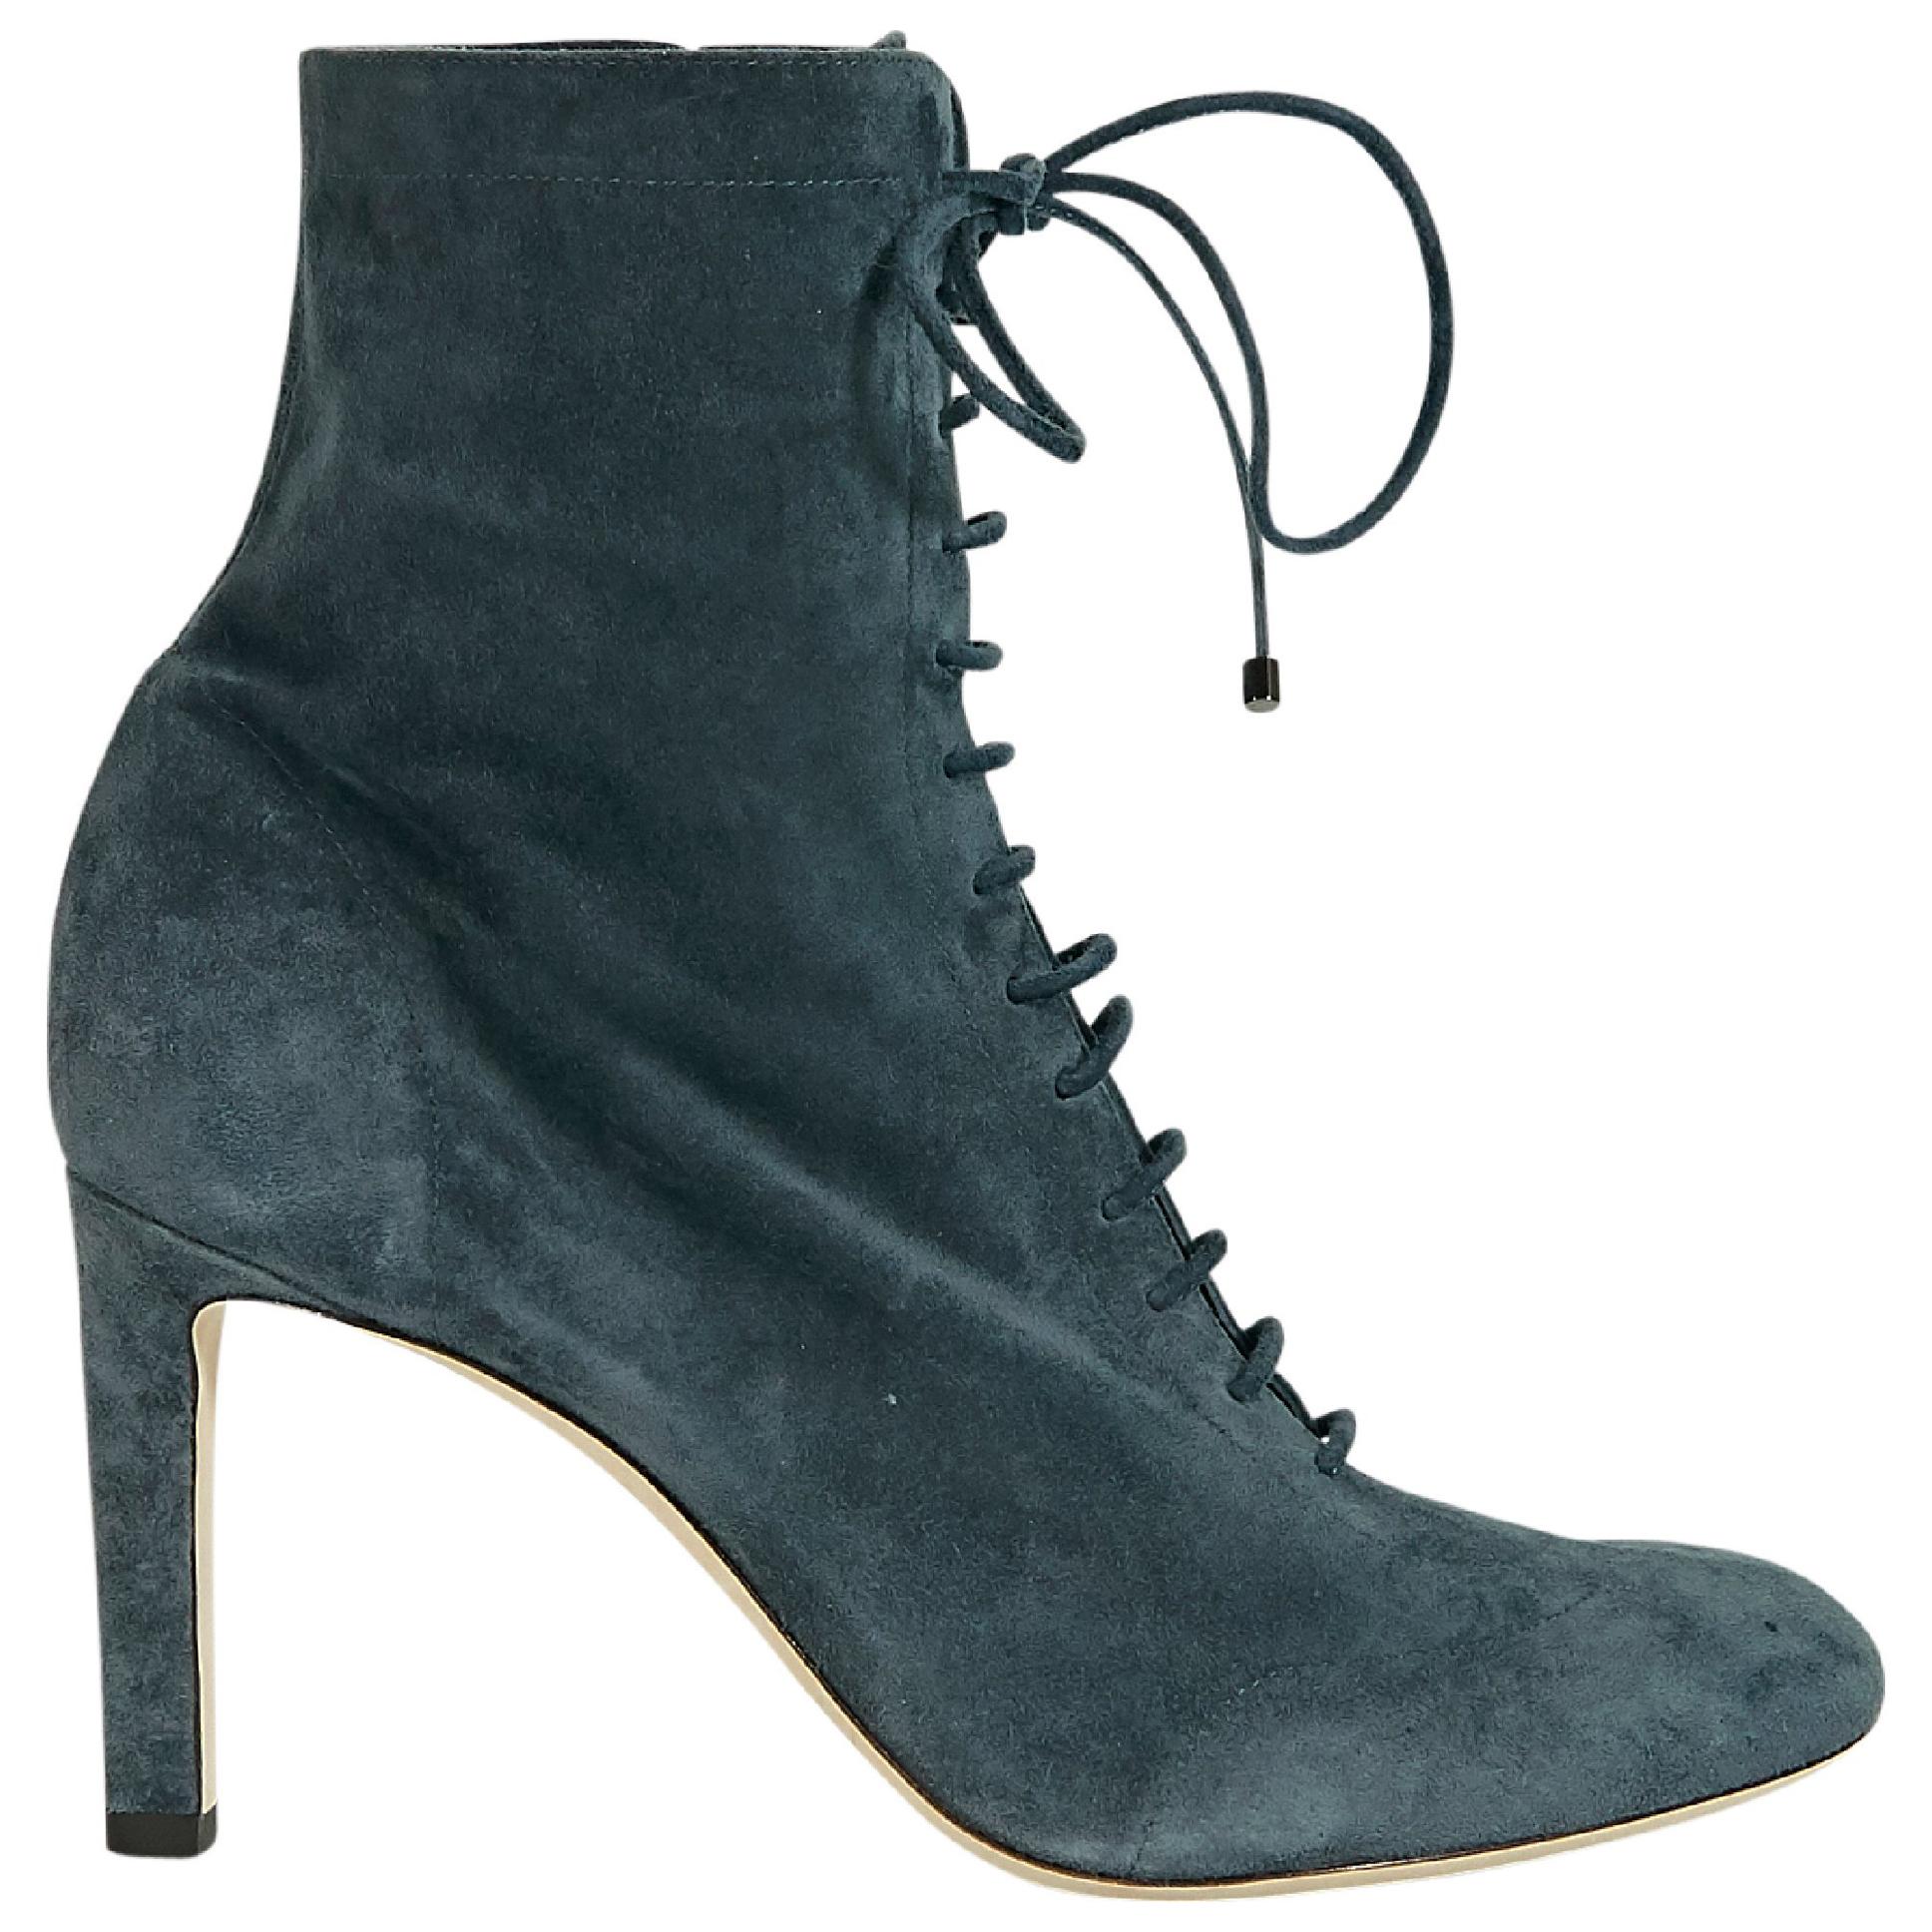 Teal Jimmy Choo Suede Ankle Boots